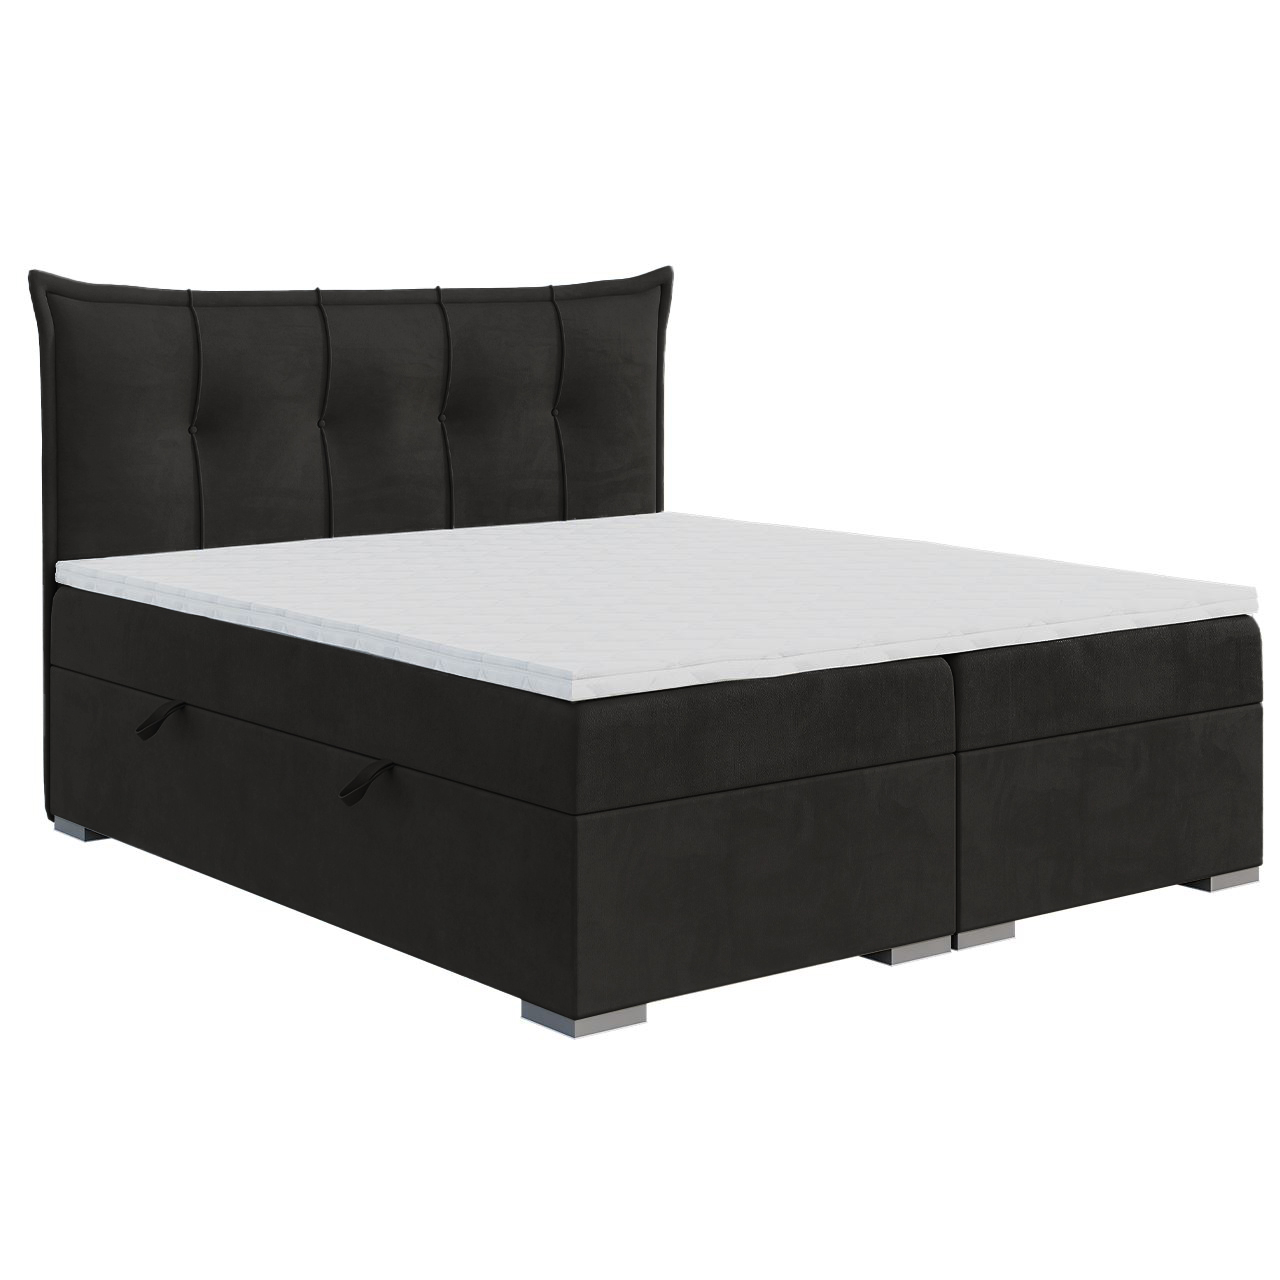 Upholstered bed MIRO 120x200 riviera 97